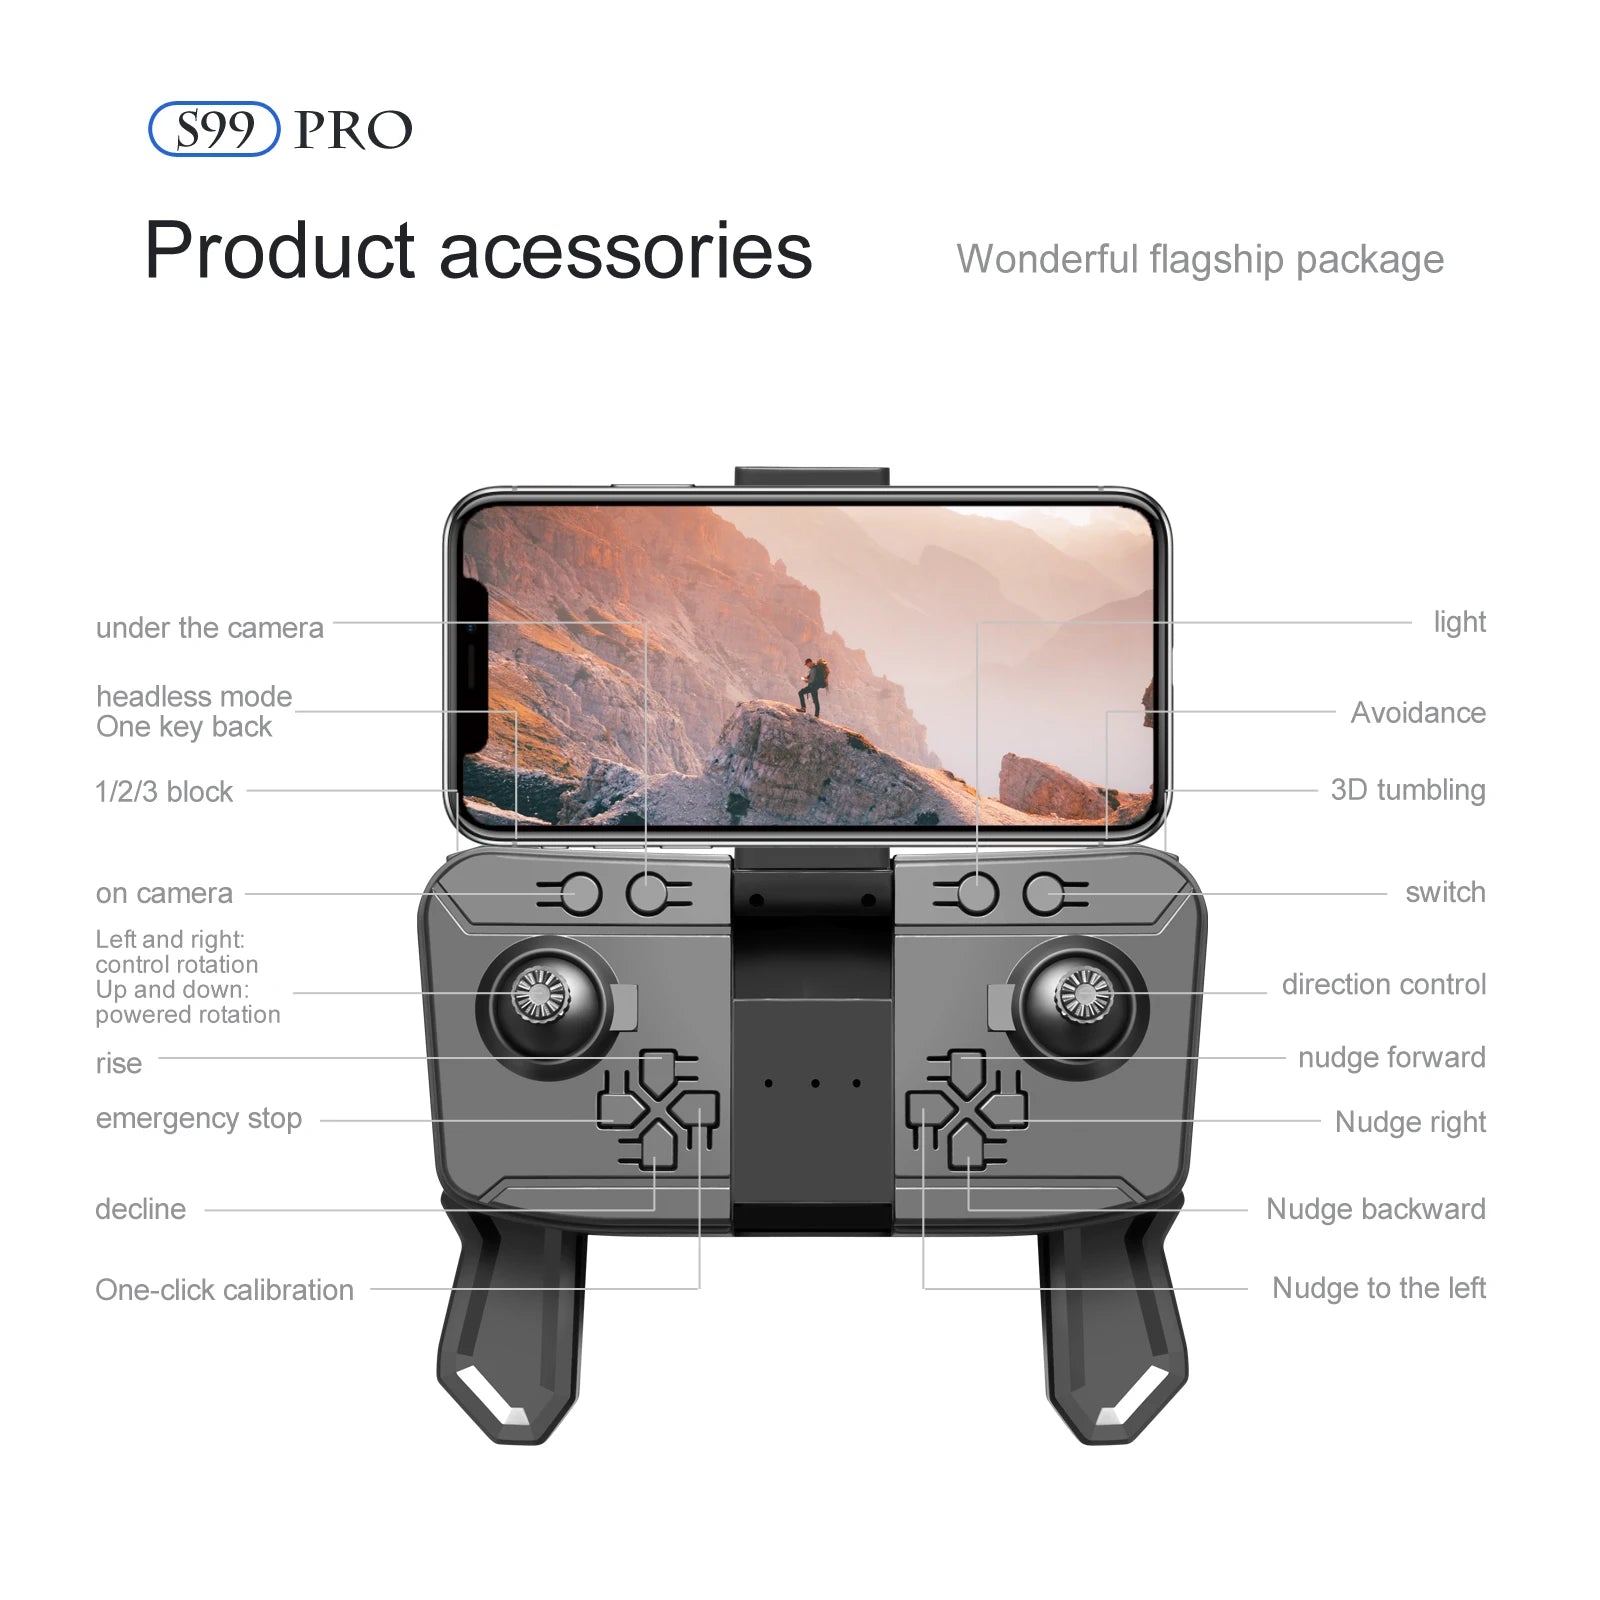 S99 Drone, s99 pro product acessories wonderful flagship package under